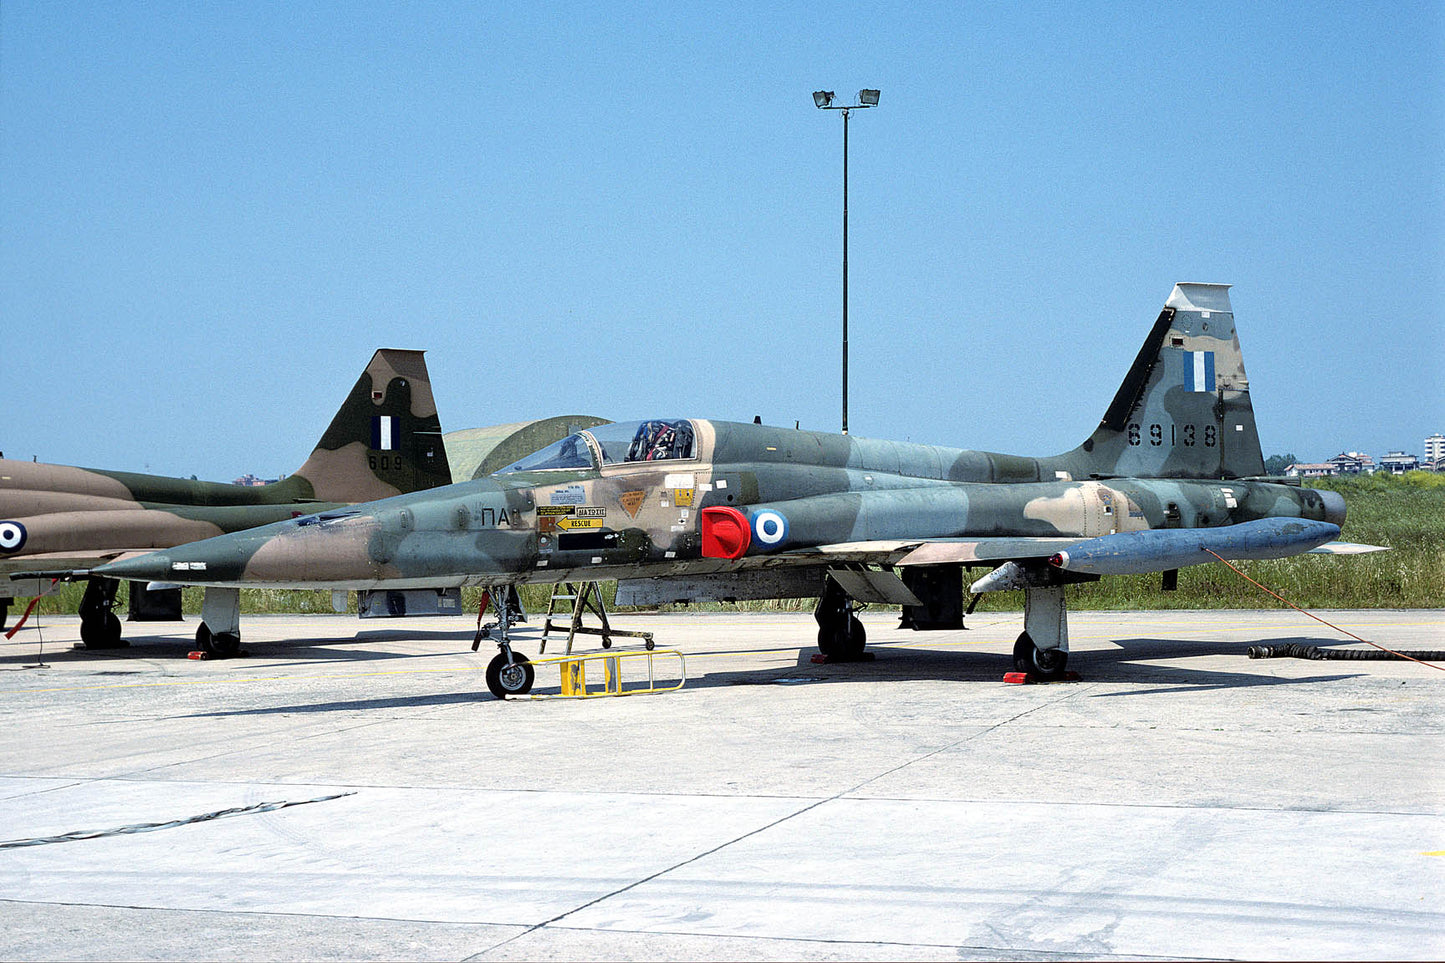 CSL06327 F-5A FREEDOM FIGHTER 69138